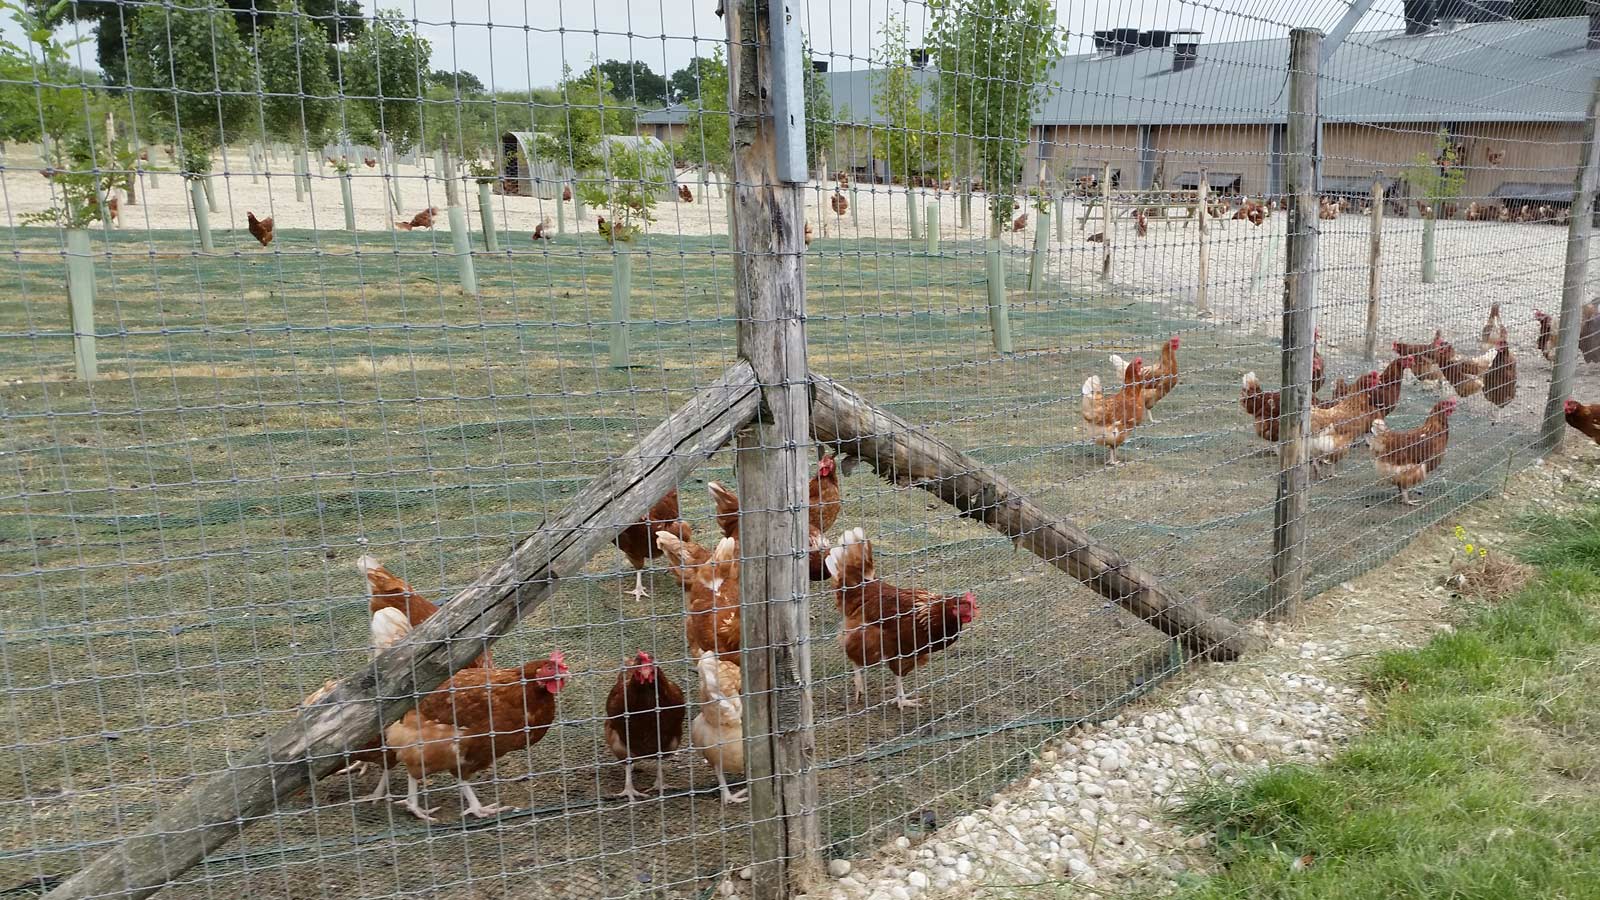 Poultry Fence. Poultry fence. Tenax